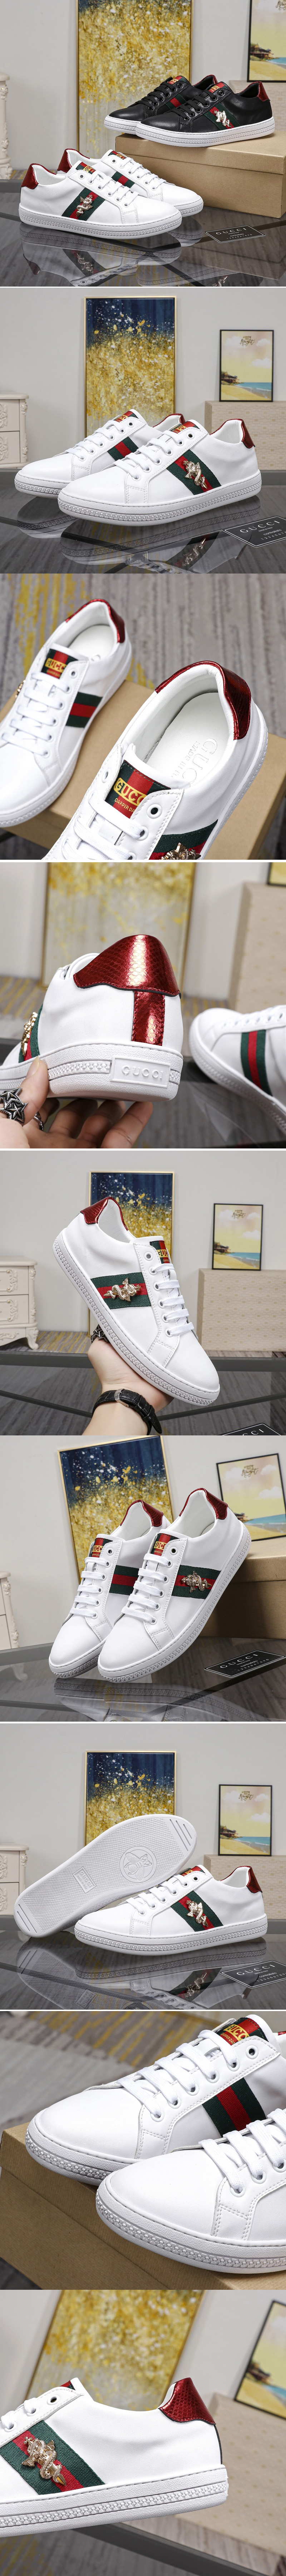 Replica Men's Gucci Ace embroidered sneaker White Leather with web